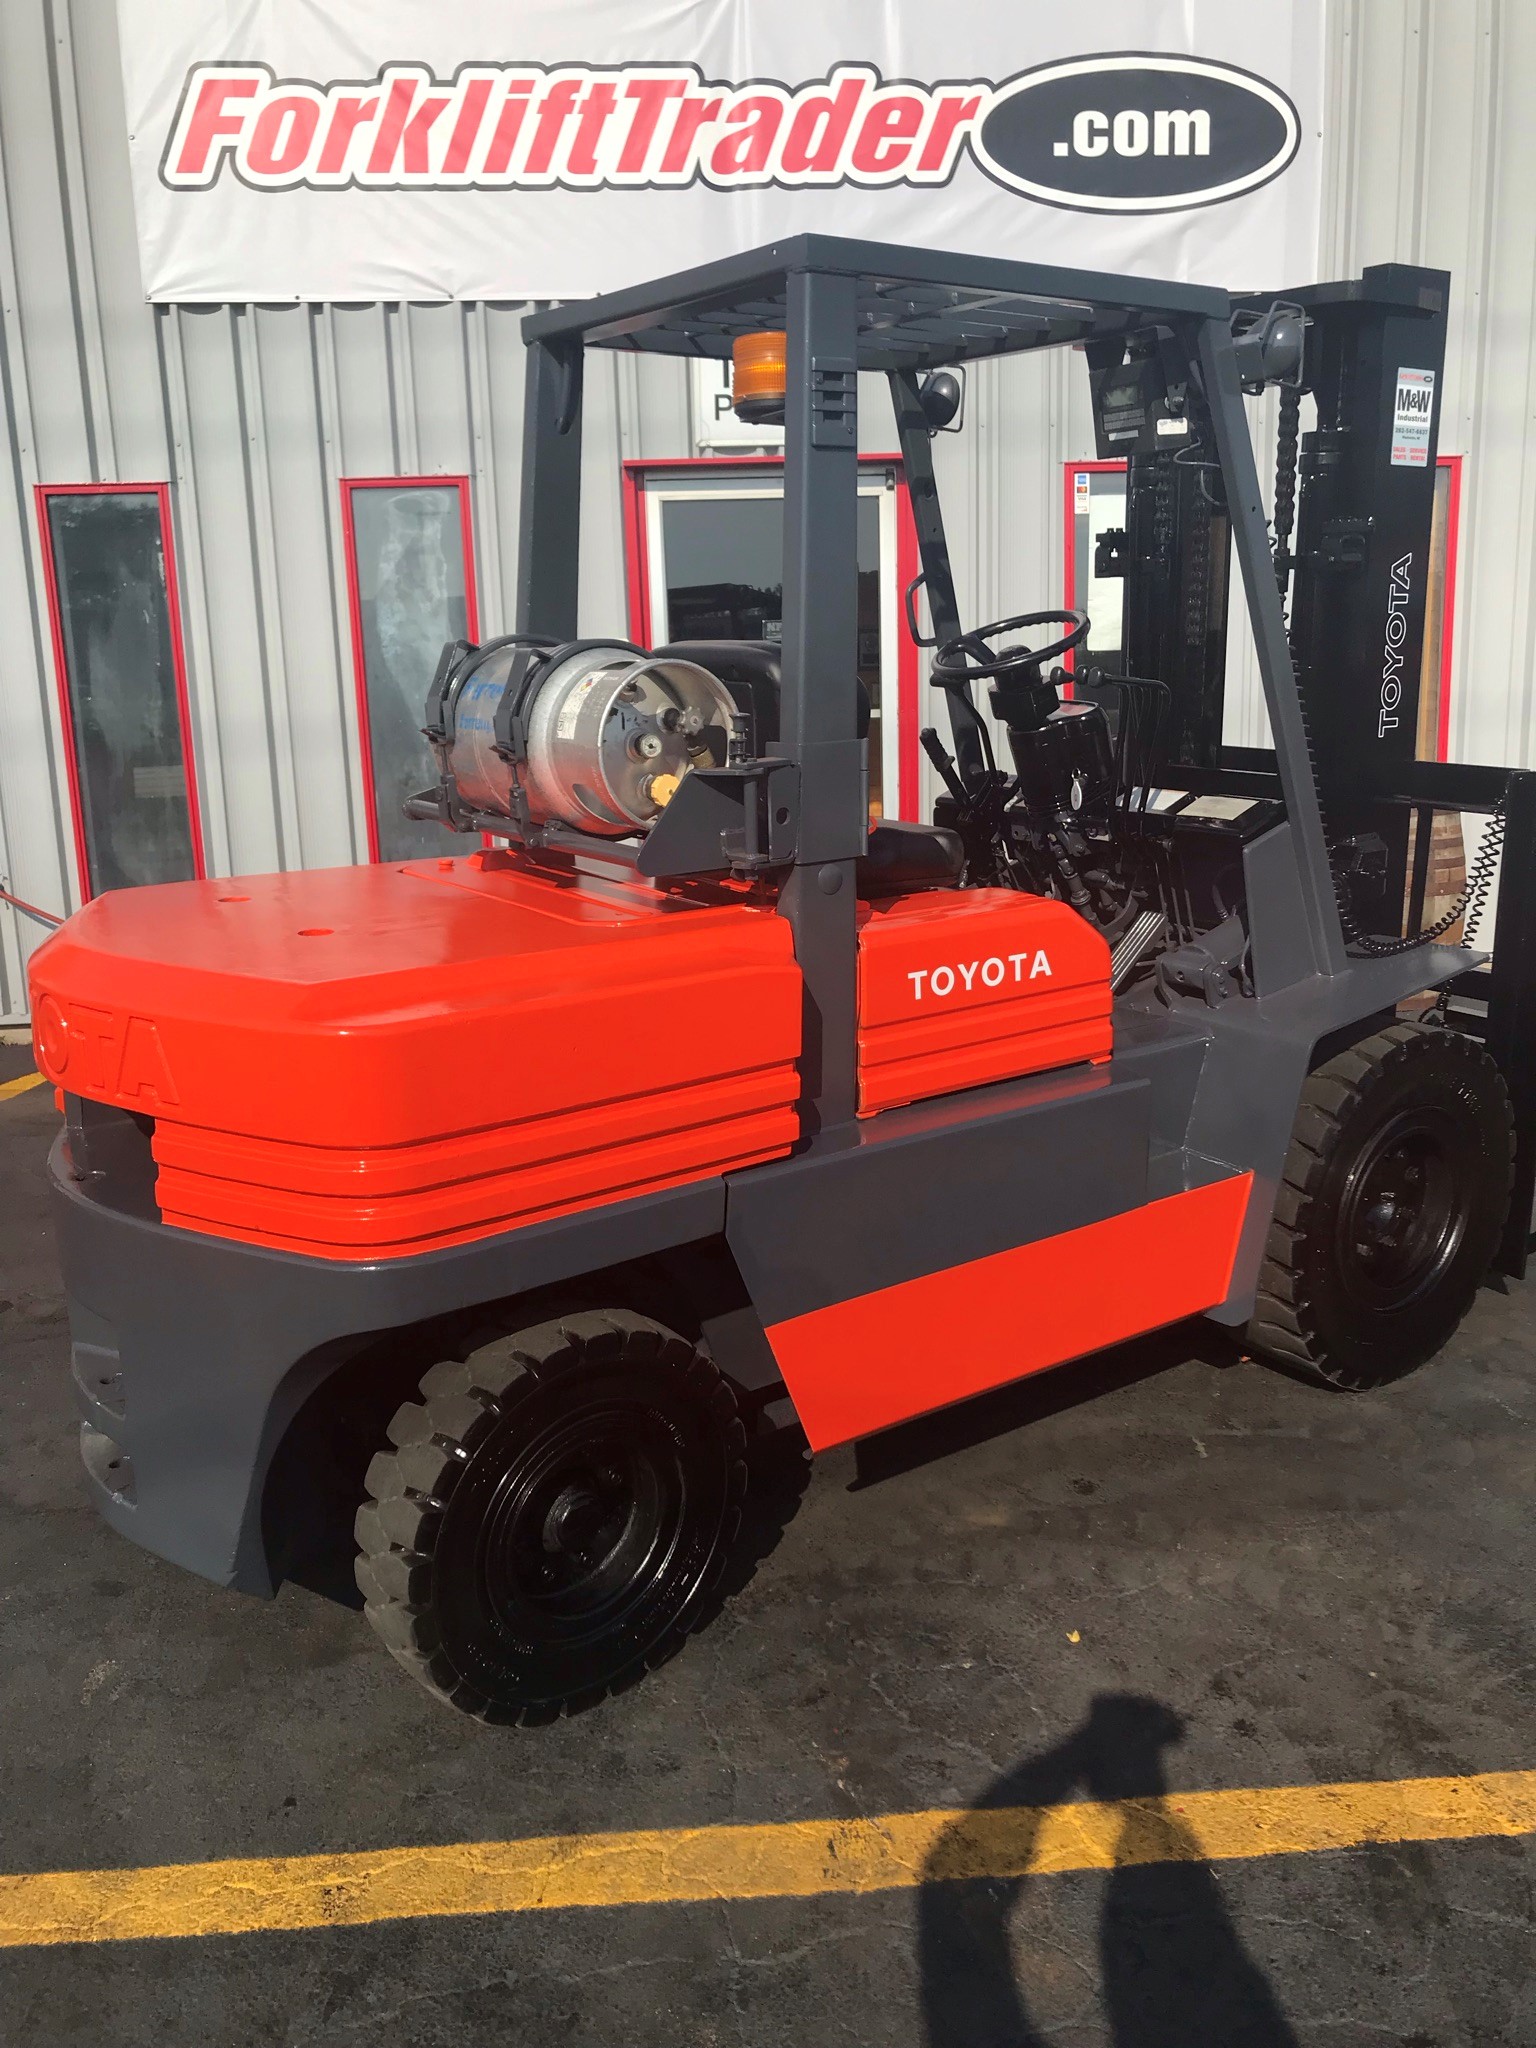 Pneumatic tires 1997 toyota forklift for sale